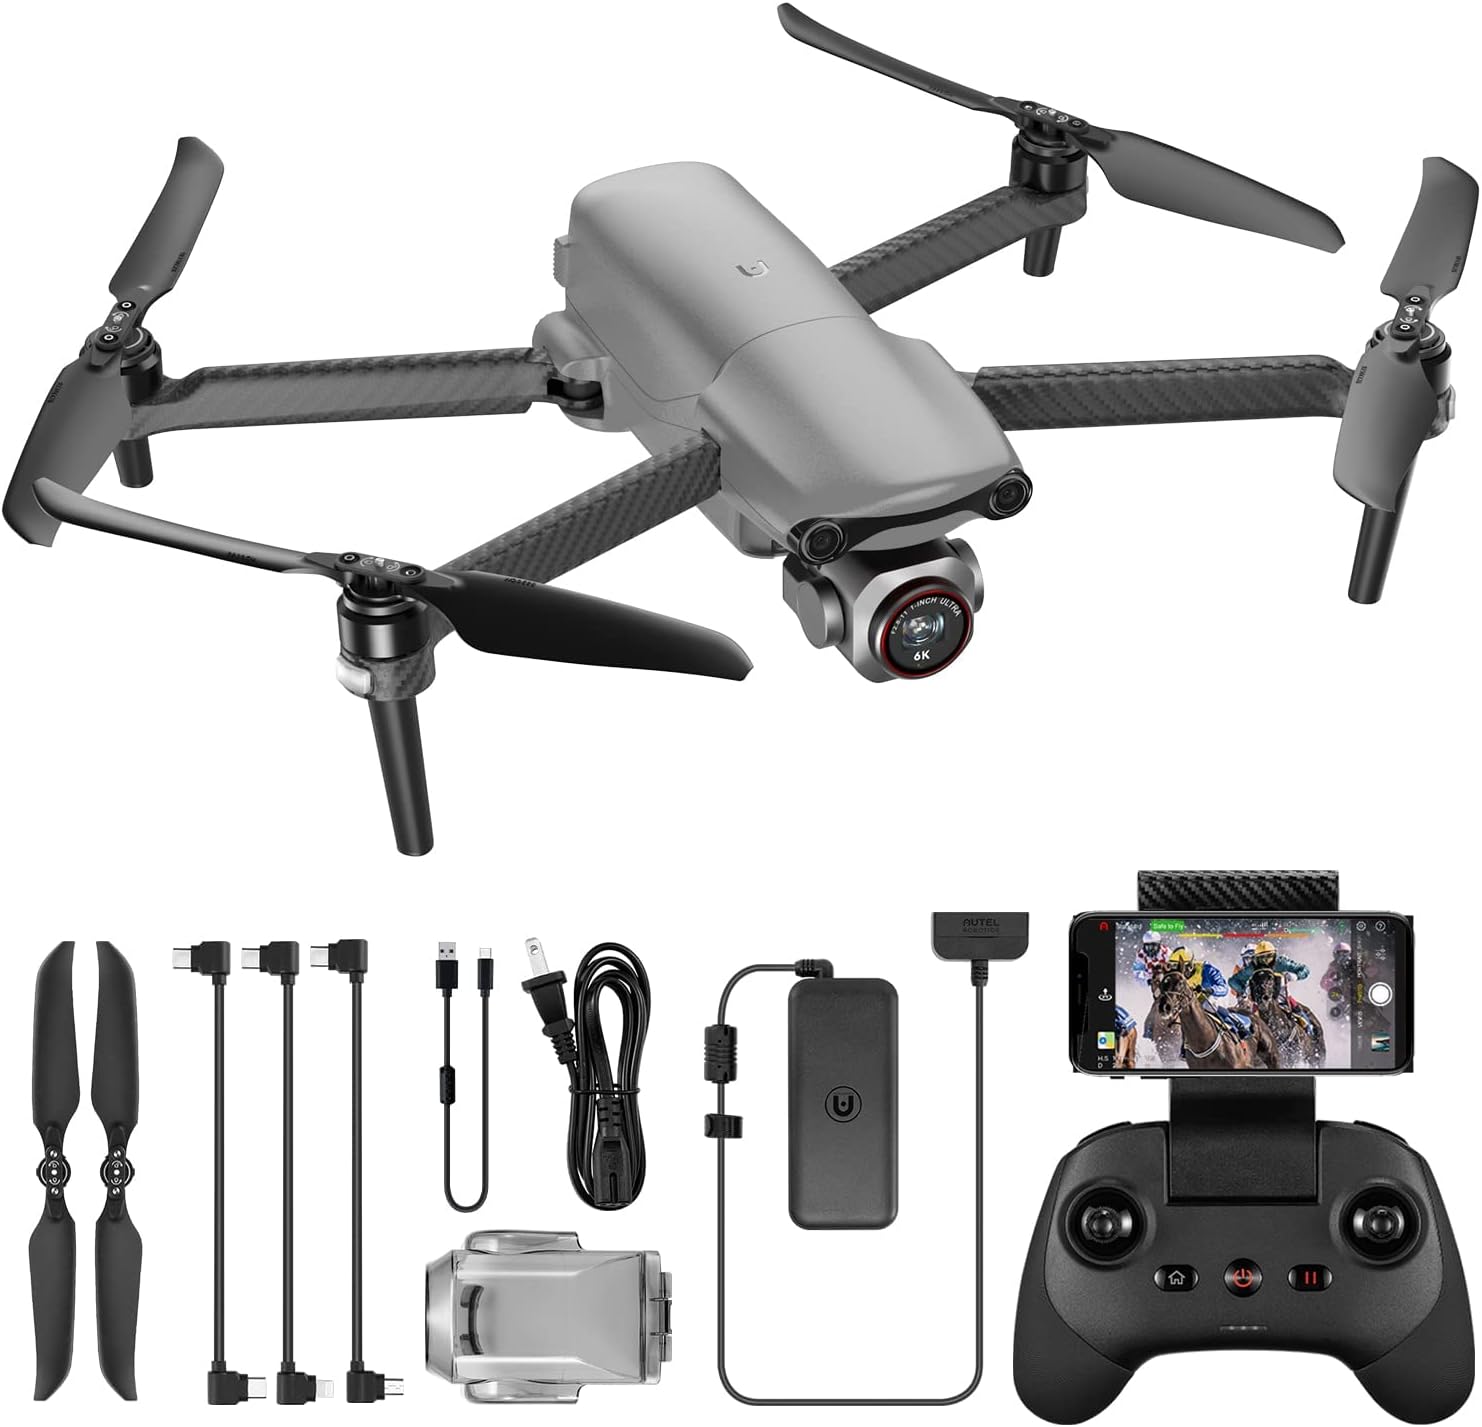 Autel EVO Lite+ Drone in Standard Grey - 20MP CMOS camera for high-quality aerial photography. 6924991102830